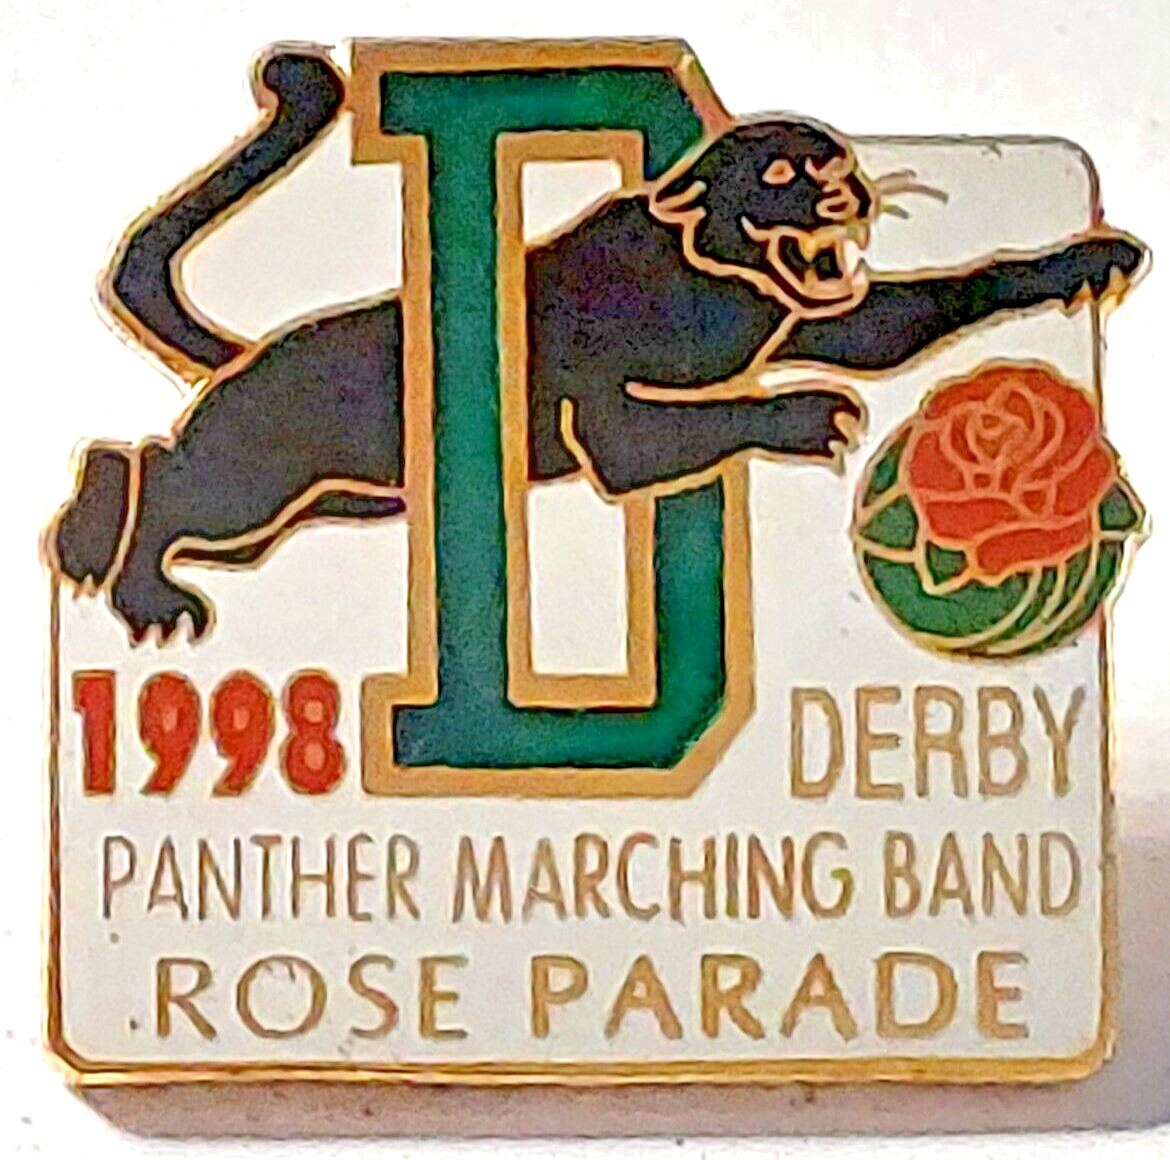 Rose Parade 1998 DERBY PANTHER MARCHING BAND Lapel Pin (082423)